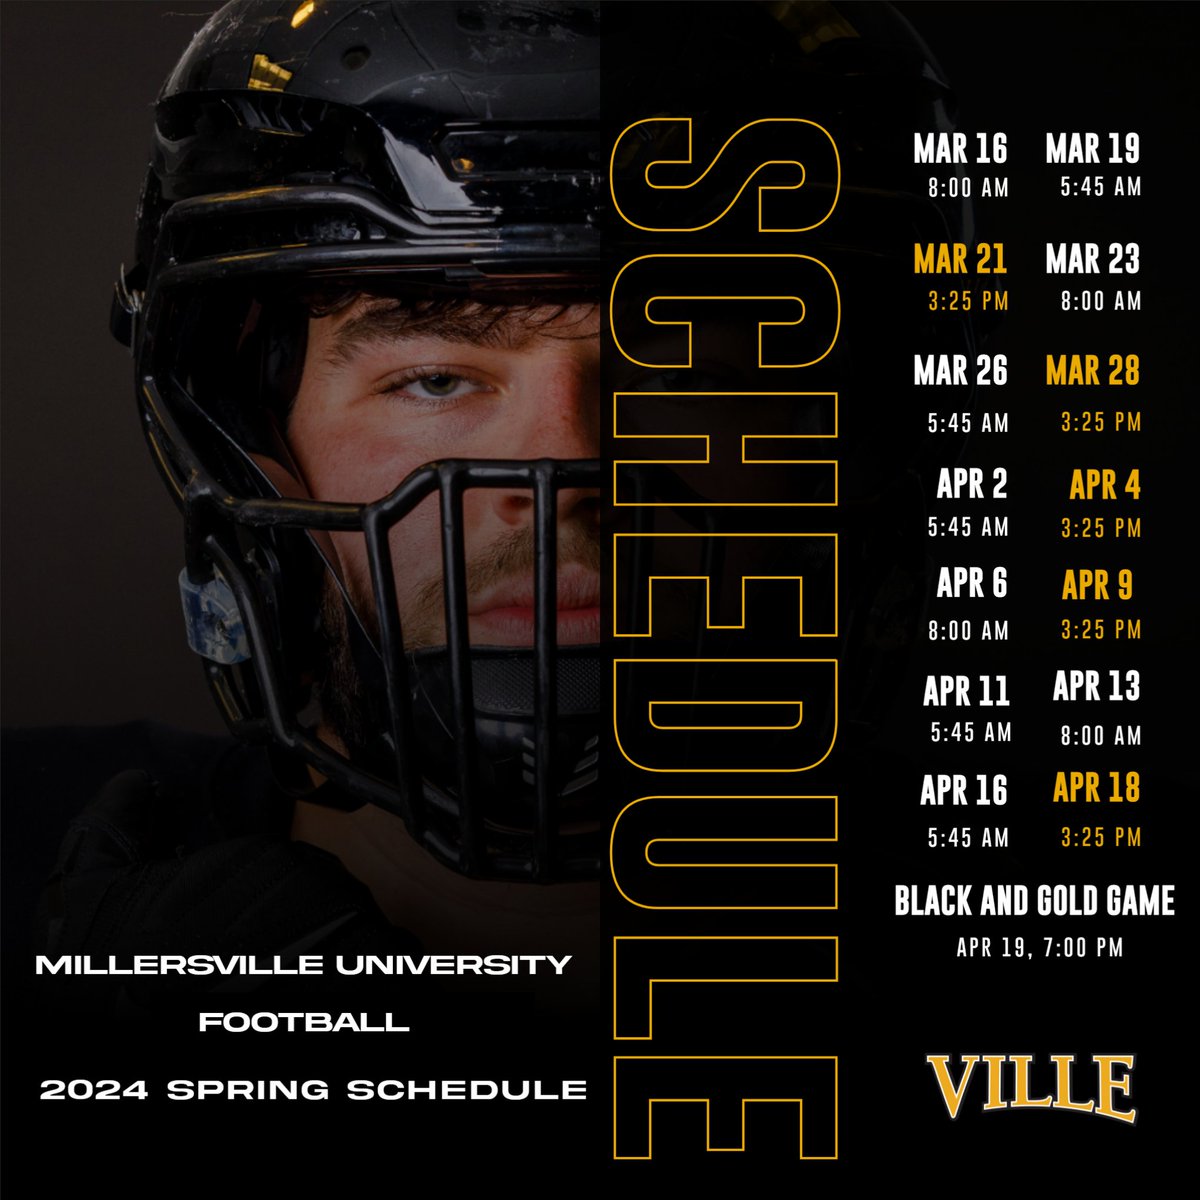 The Ville is back between the chalk in just over 2 weeks! Come see the Marauders in action! 〽️